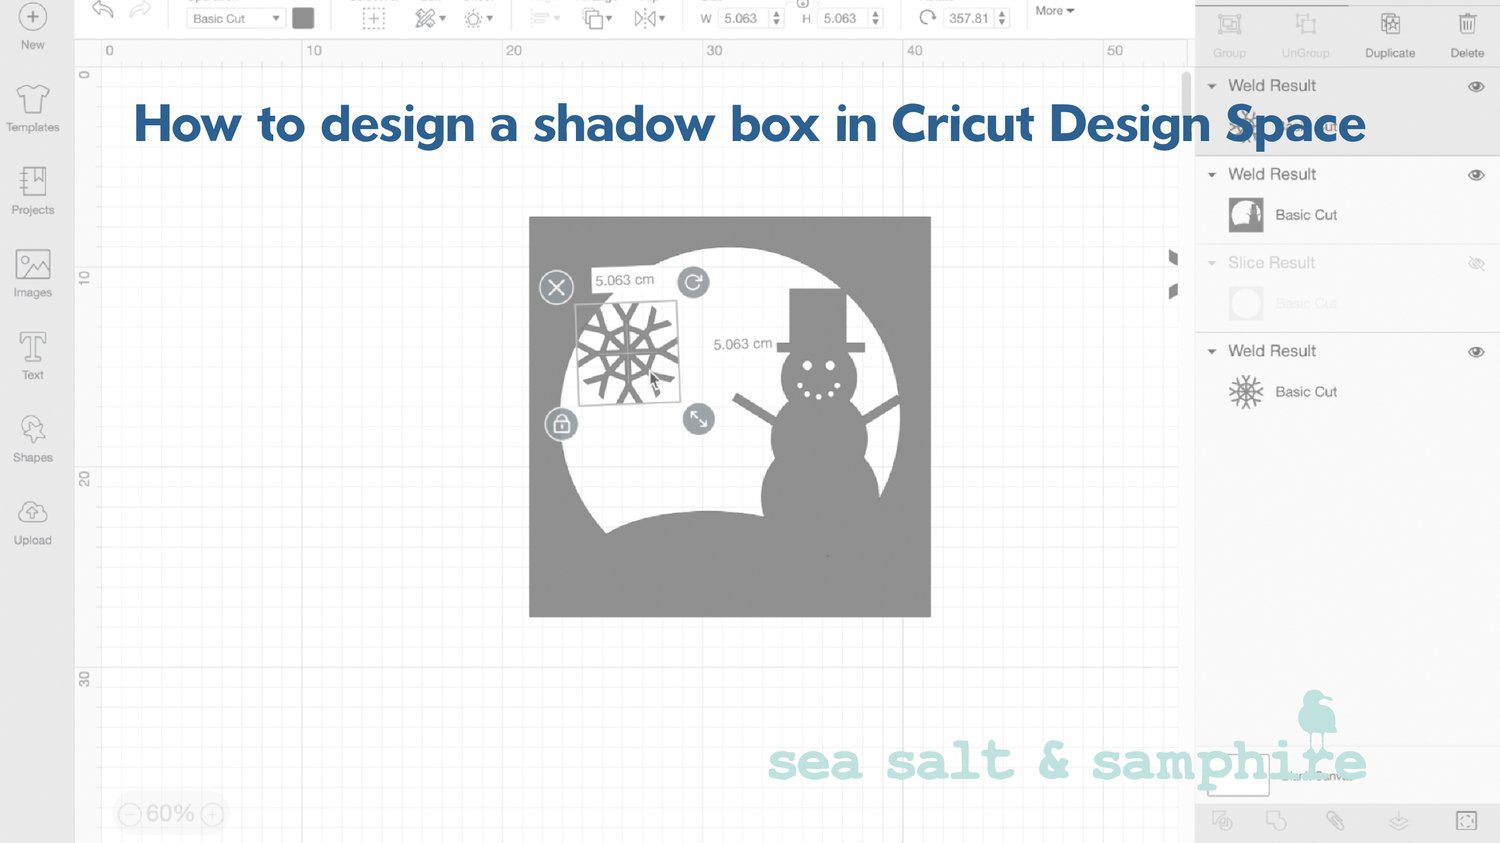 Image of the design screen in Cricut Design Space with the header How to design a shadow box in Cricut Design Space